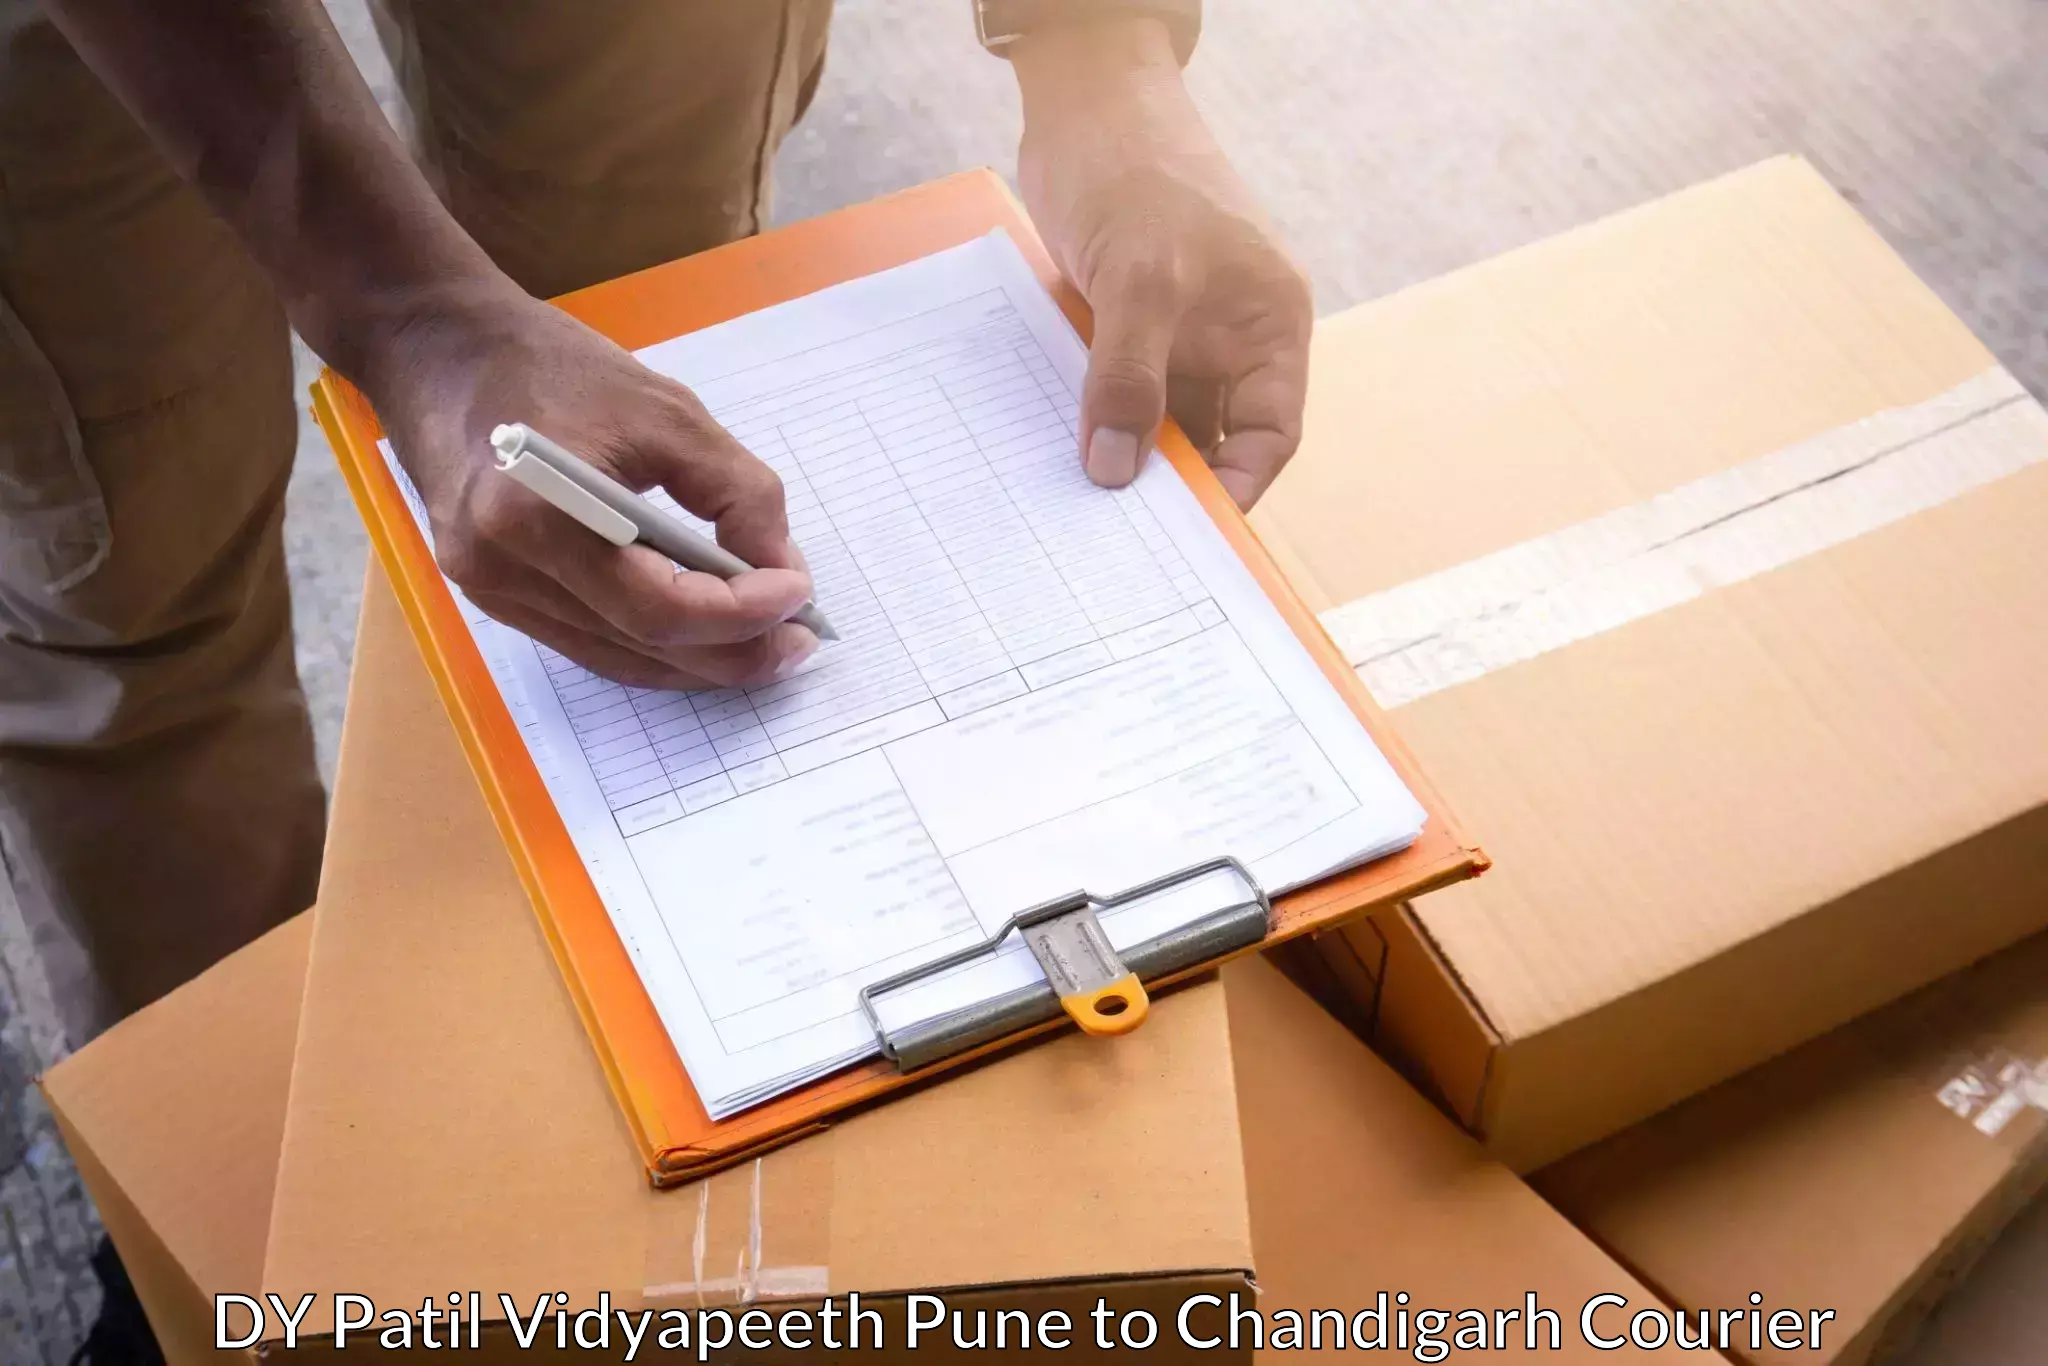 Courier service efficiency DY Patil Vidyapeeth Pune to Chandigarh